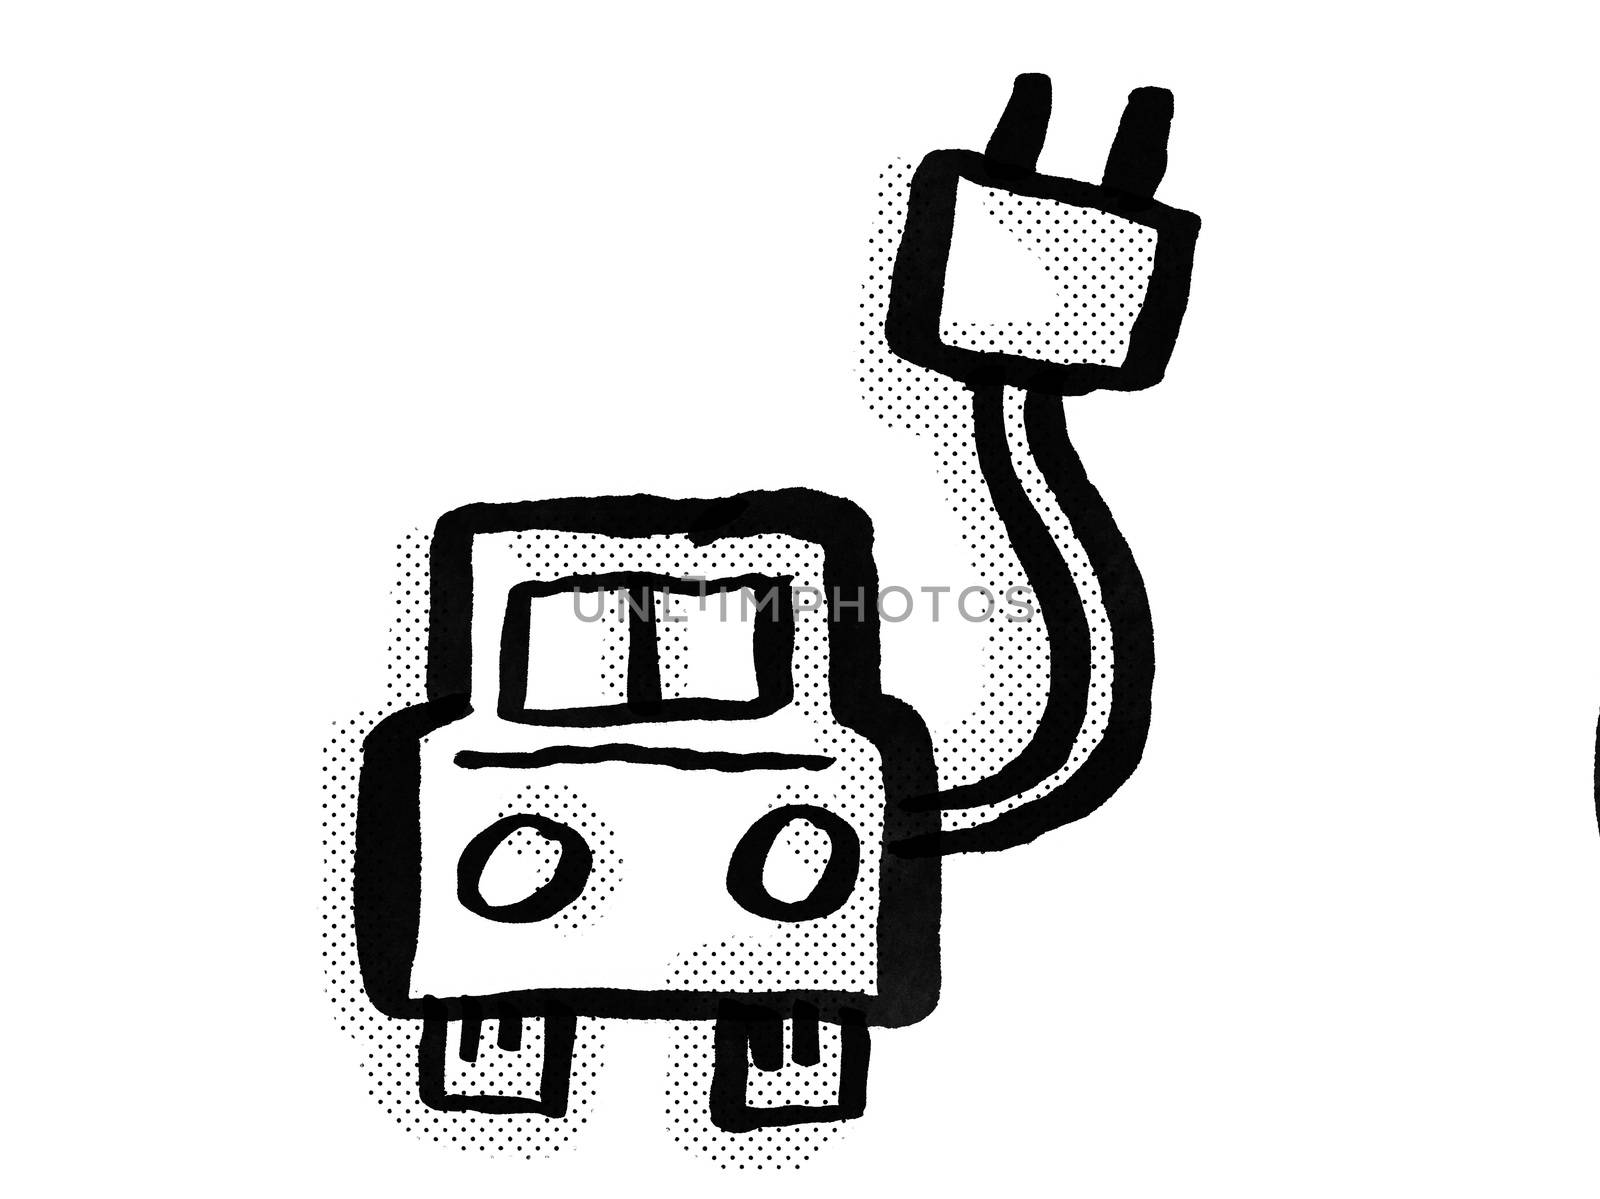 Retro cartoon style drawing of an electric vehicle (EV) charging station icon or symbol on isolated white background done in black and white